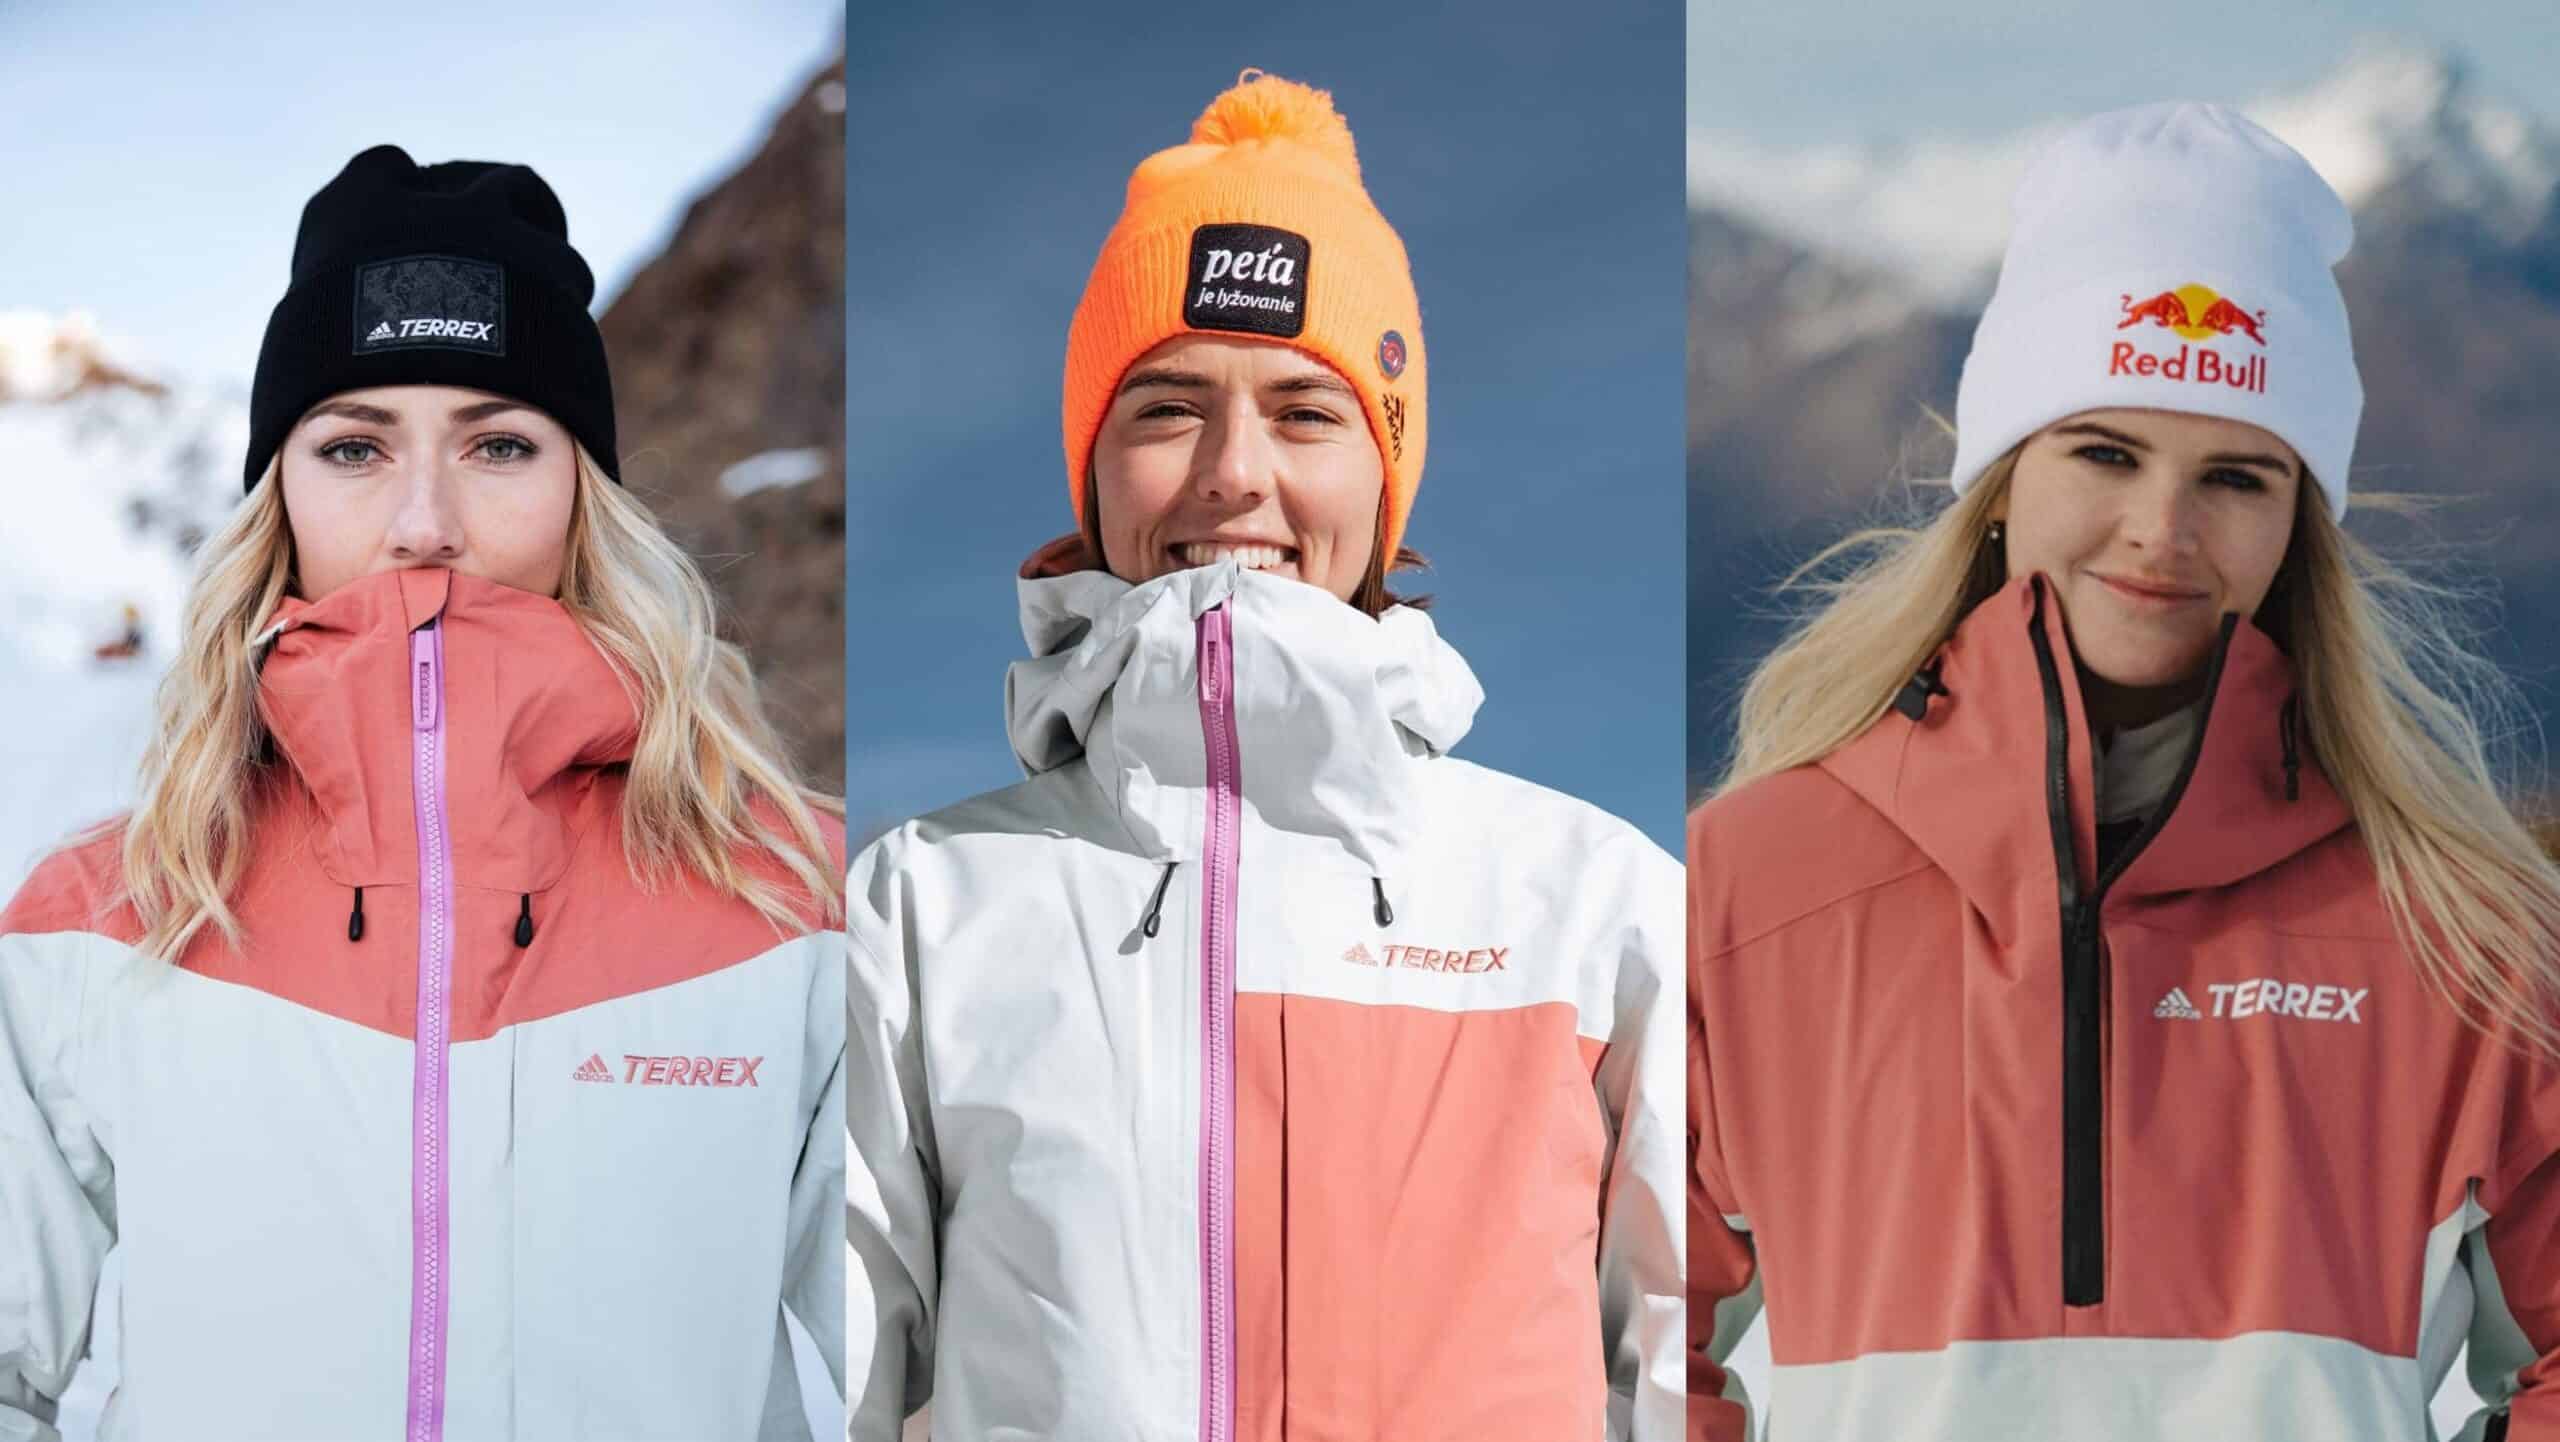 United by passion, determination and focus – petra vlhová and alice robinson join mikaela shiffrin as new adidas terrex athletes